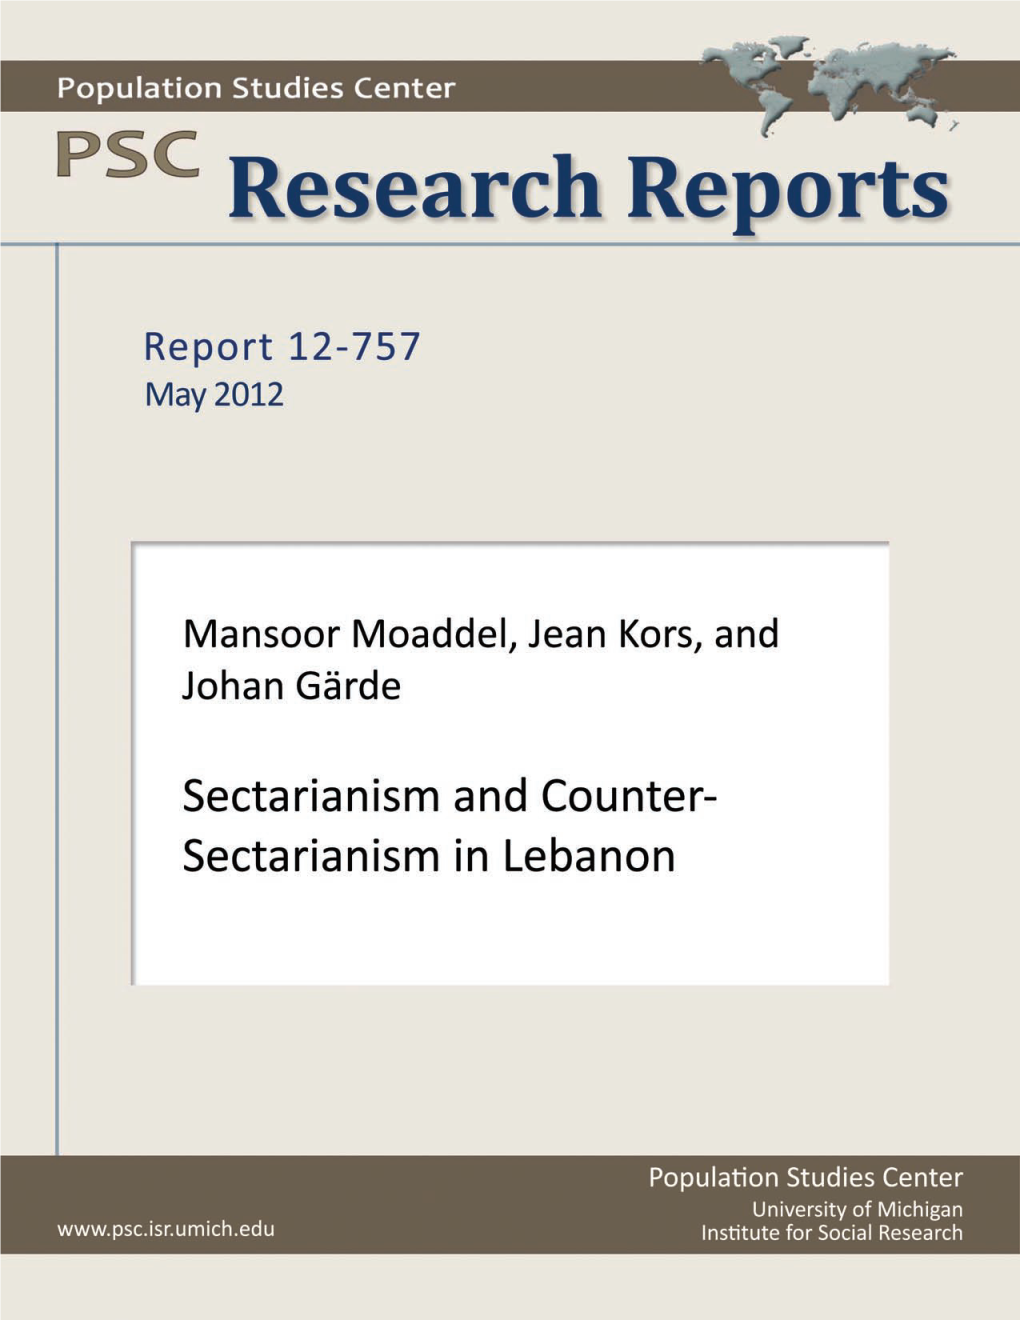 Sectarianism and Counter-Sectarianism in Lebanon